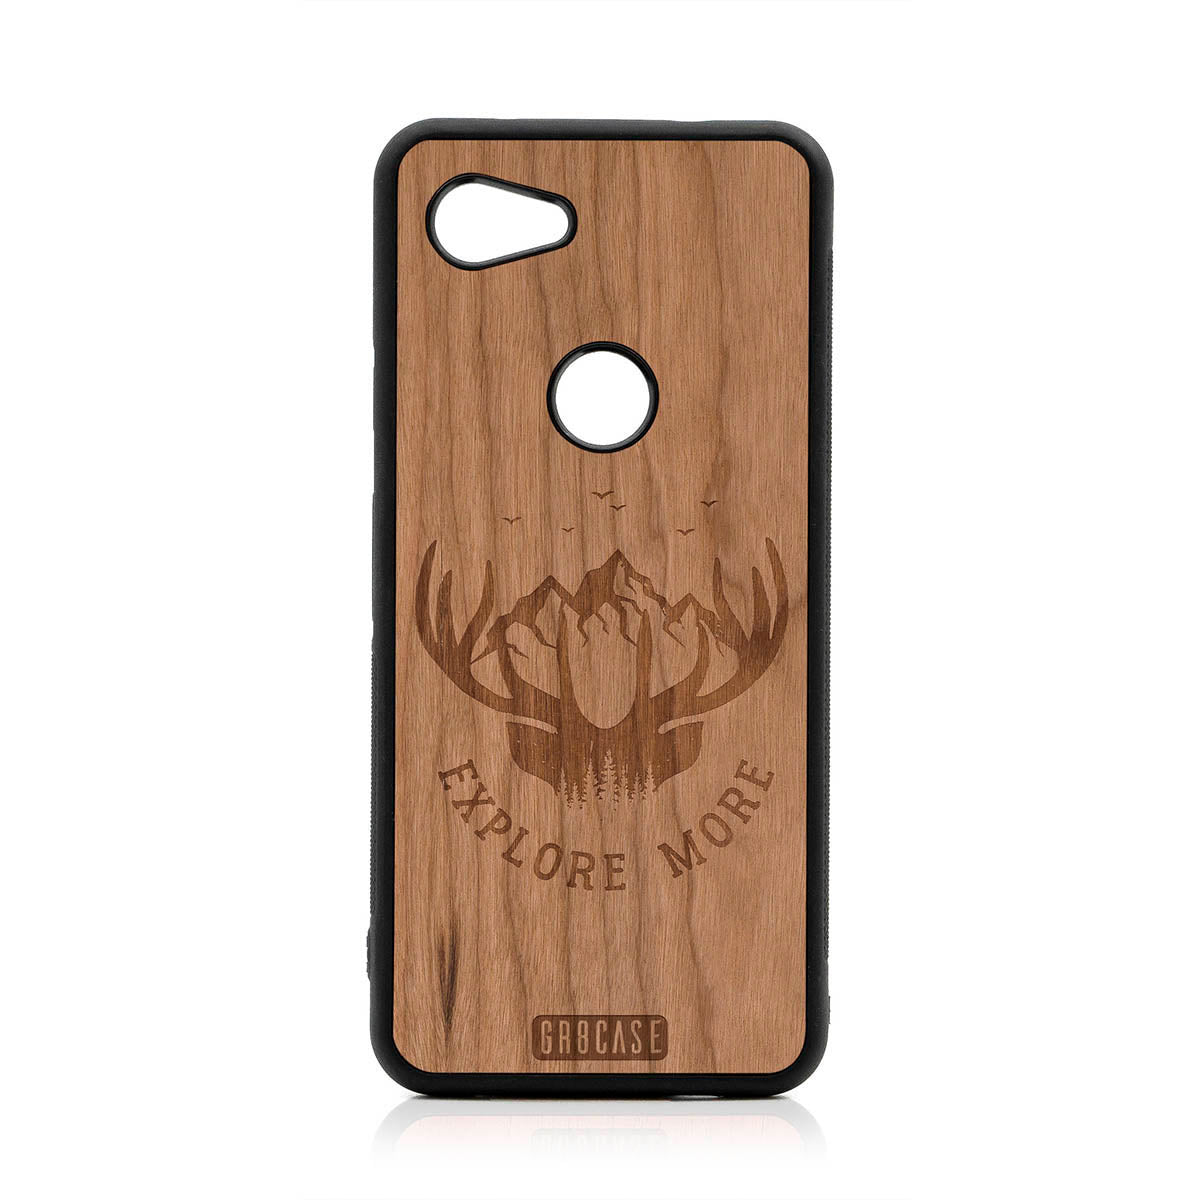 Explore More (Forest, Mountains & Antlers) Design Wood Case For Google Pixel 3A XL by GR8CASE